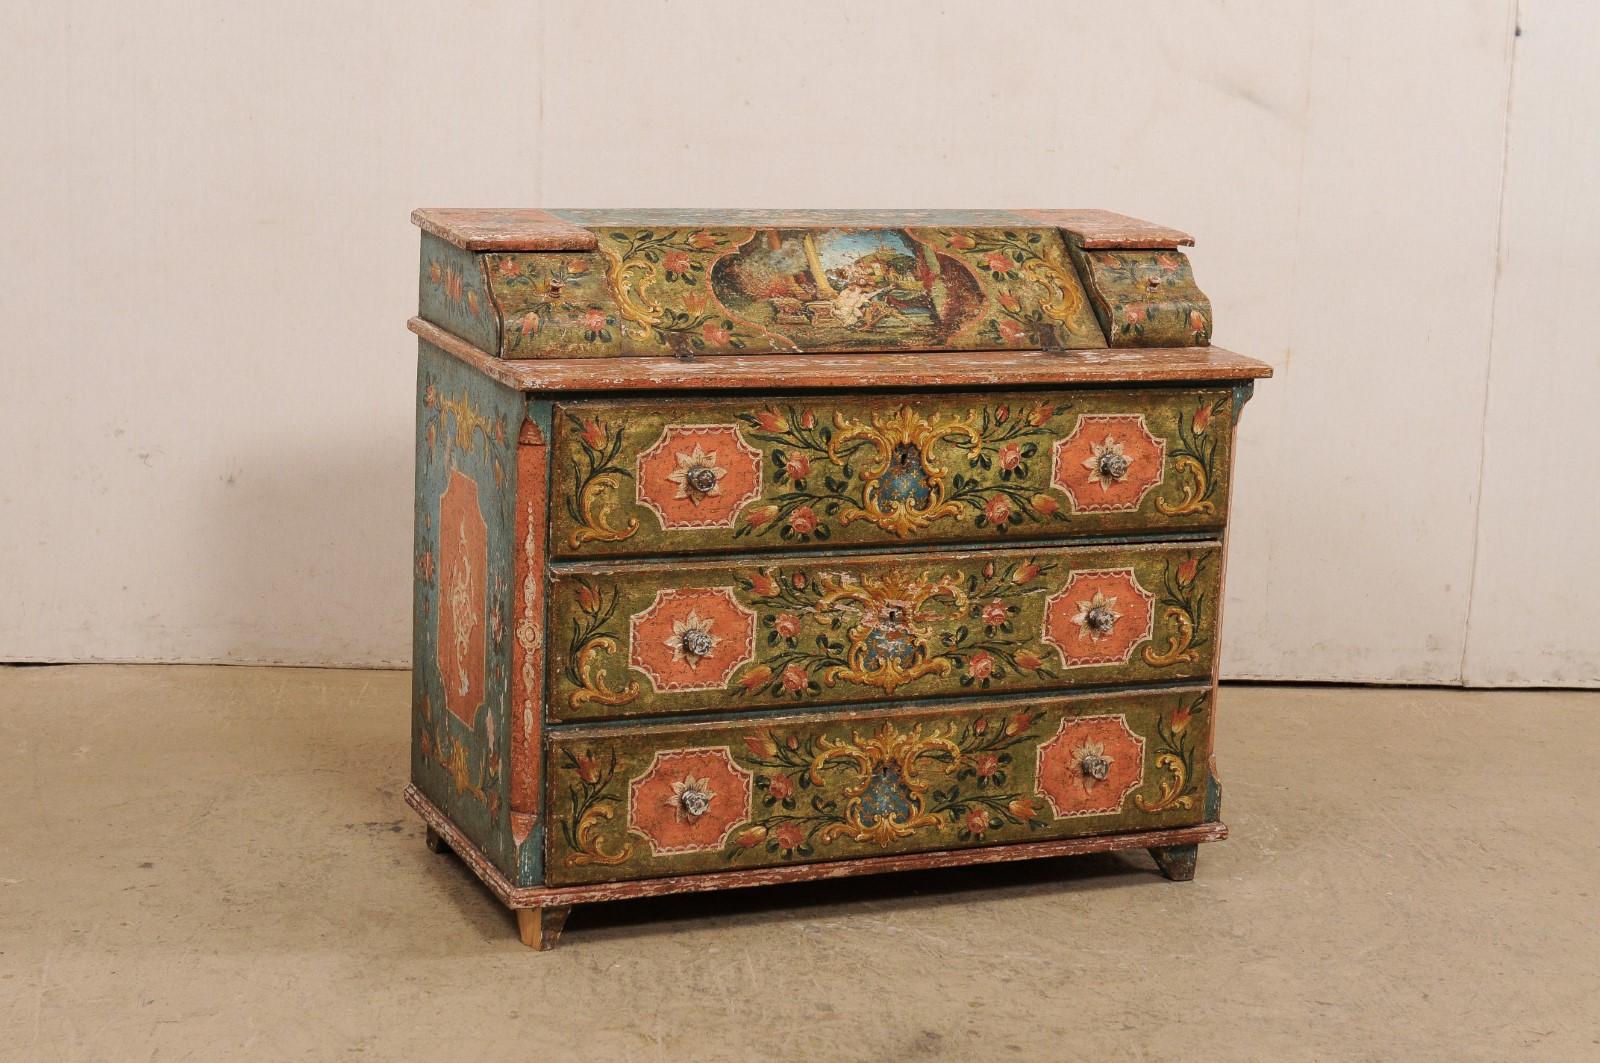 A European wooden secretary chest, with original hand-painted finish, from the 19th century. This antique chest from Europe features a slanted fall-front at top, flanked between two small pull-out drawers, which opens to reveal open storage within a